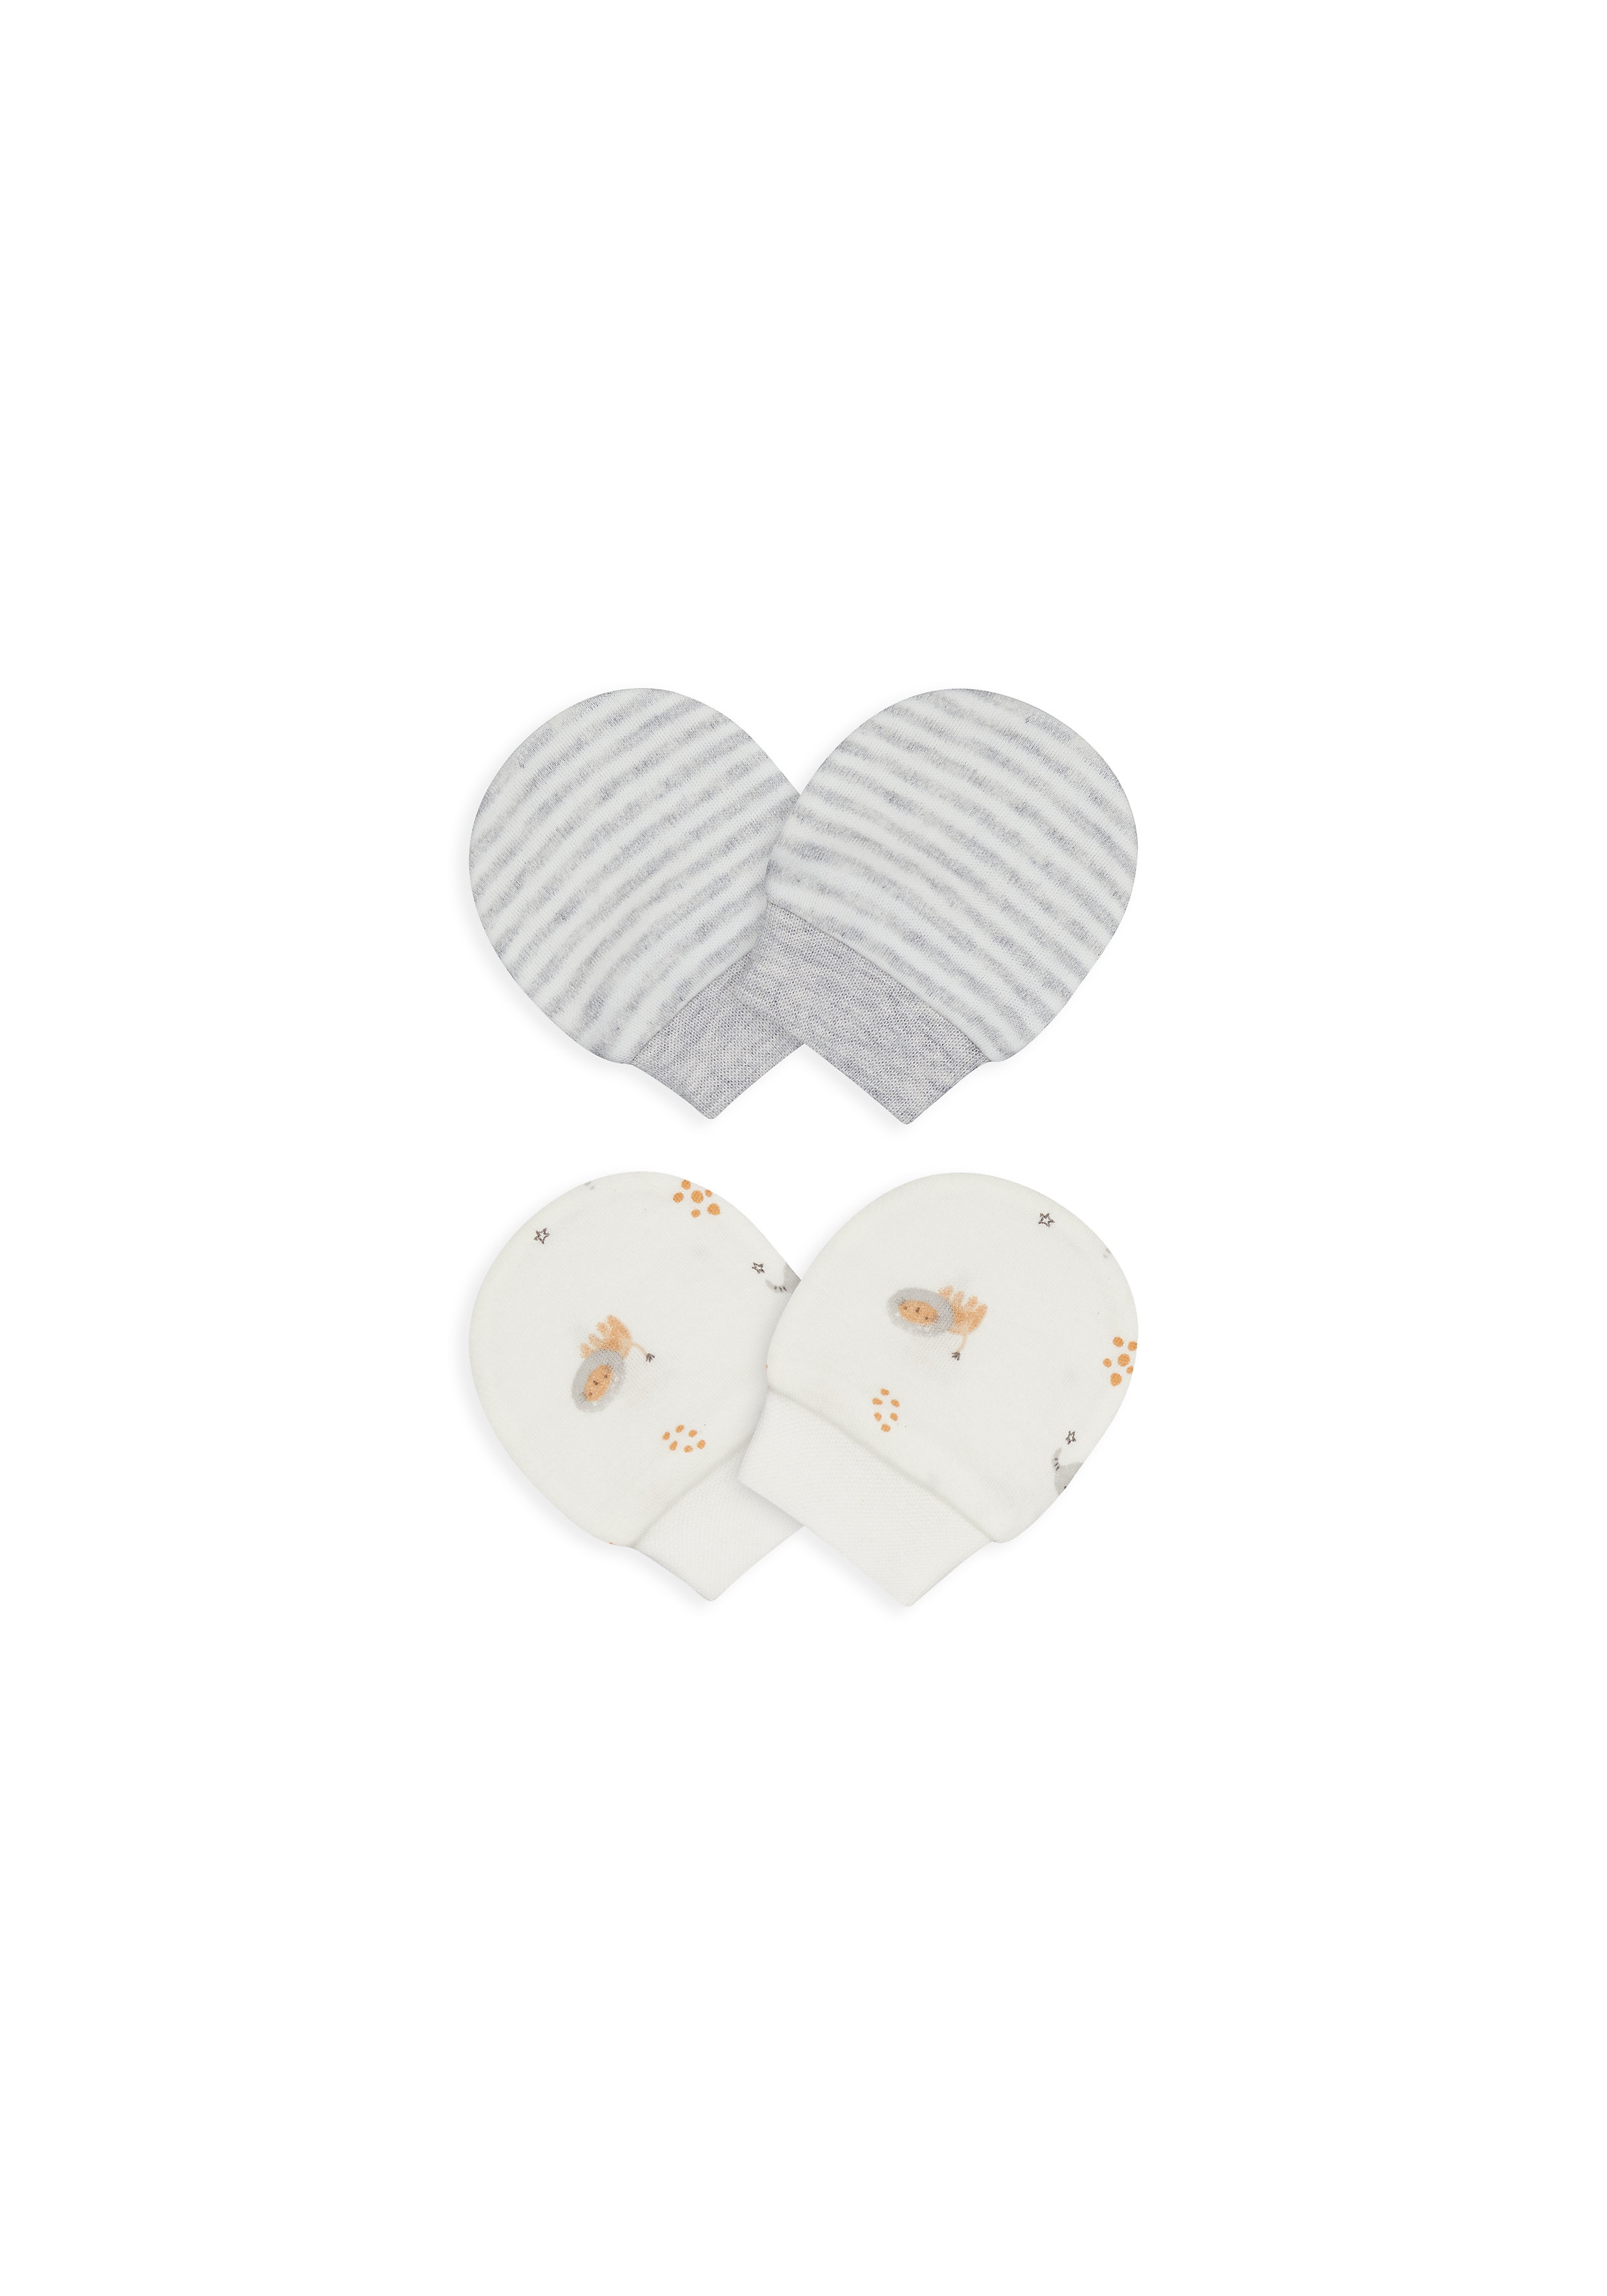 Unisex Mitts Striped And Printed - Pack Of 2 - Grey & White